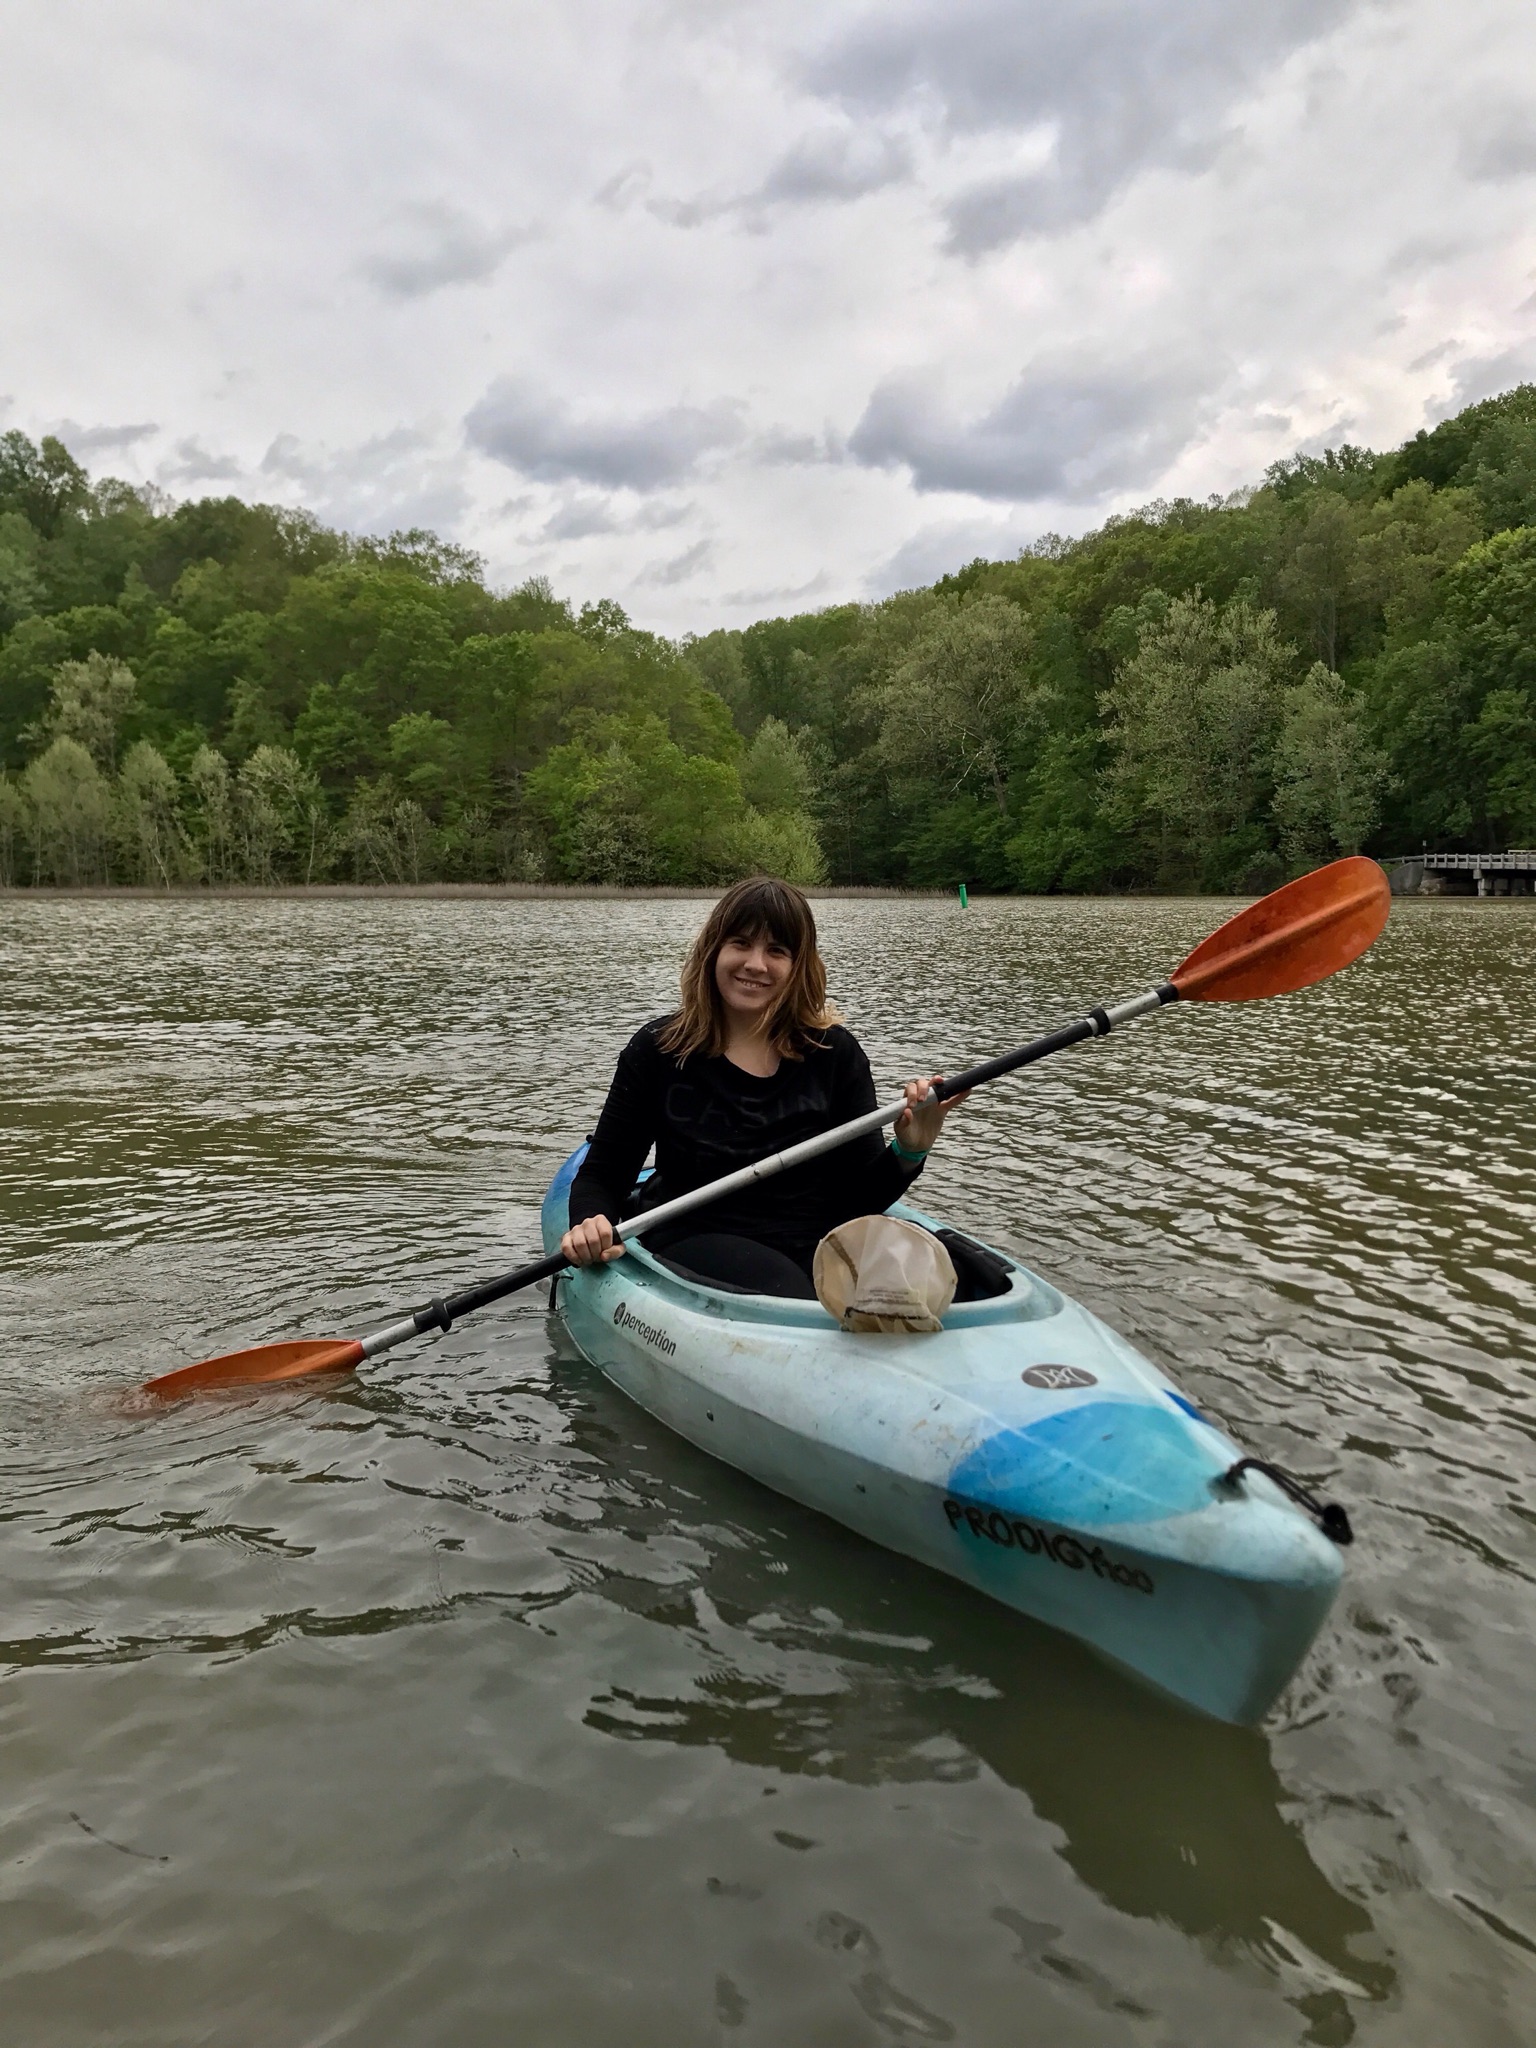 A women sits in a blue boat (kayak) holding a double-sided paddle in the middle of a lake. Trees and cloudy background.